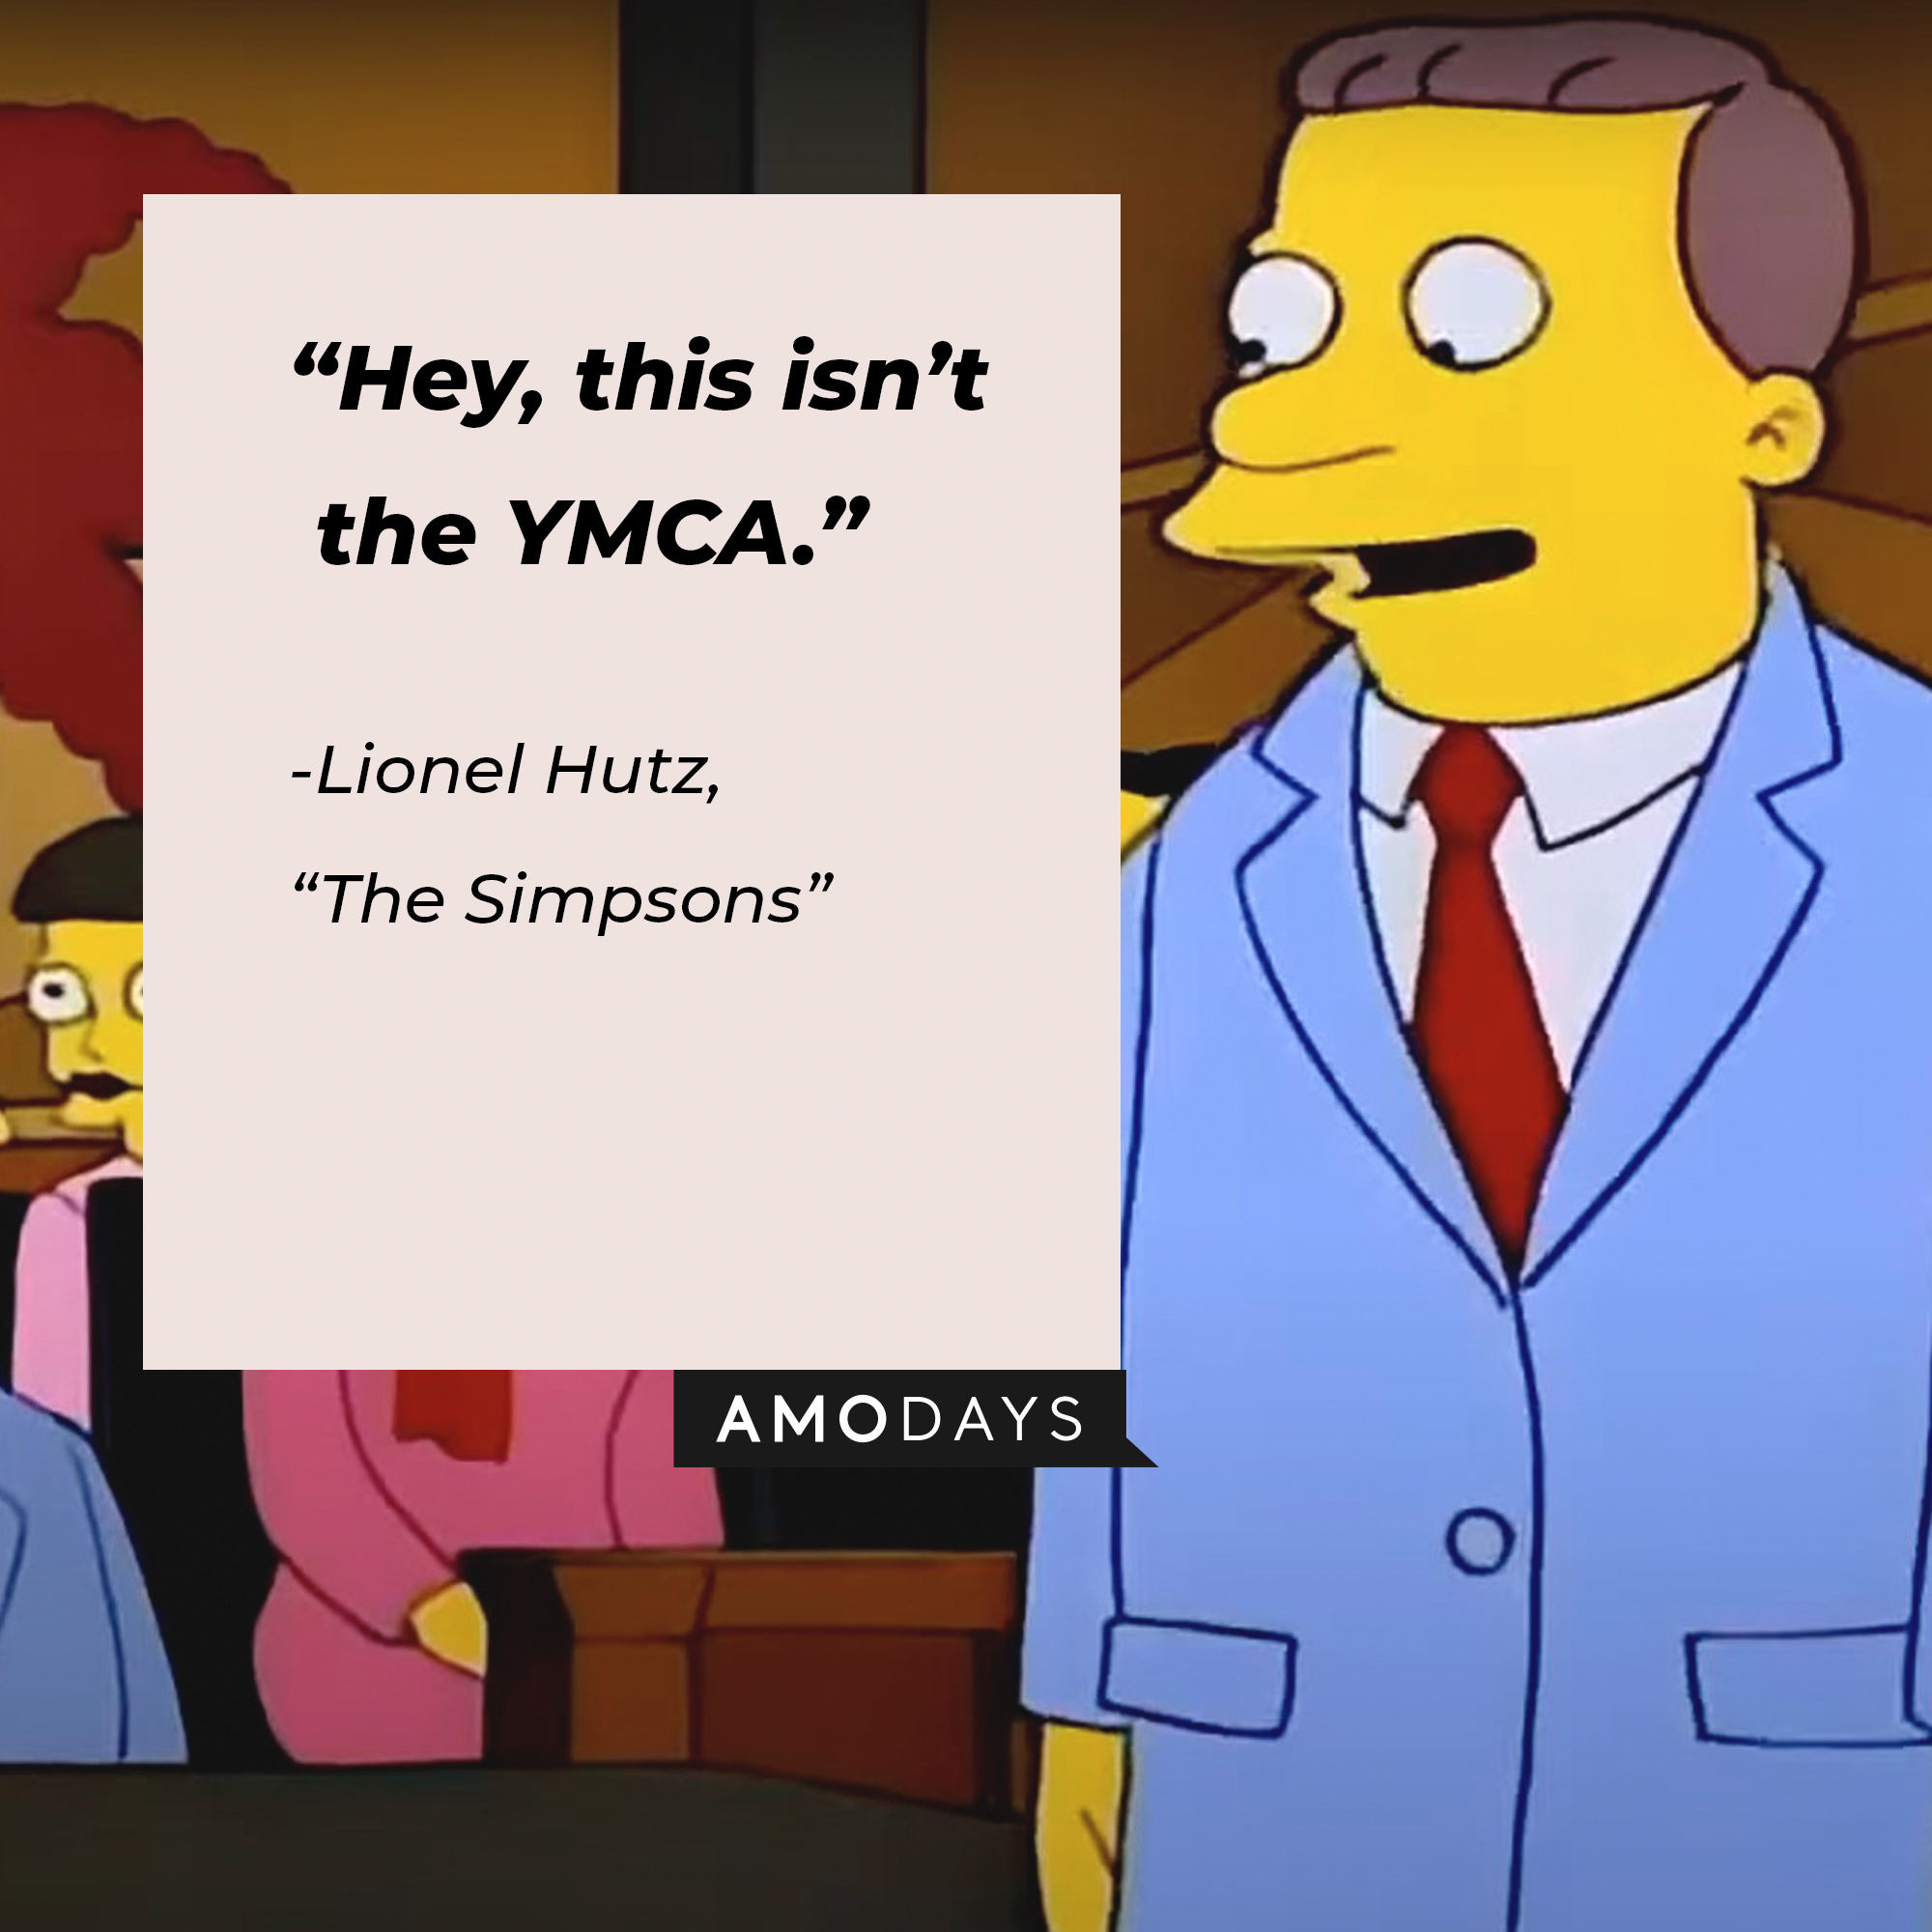 Lionel Hutz’s quote from “The Simpsons”: “Hey, this isn’t the YMCA.” | Source: facebook.com/TheSimpsons